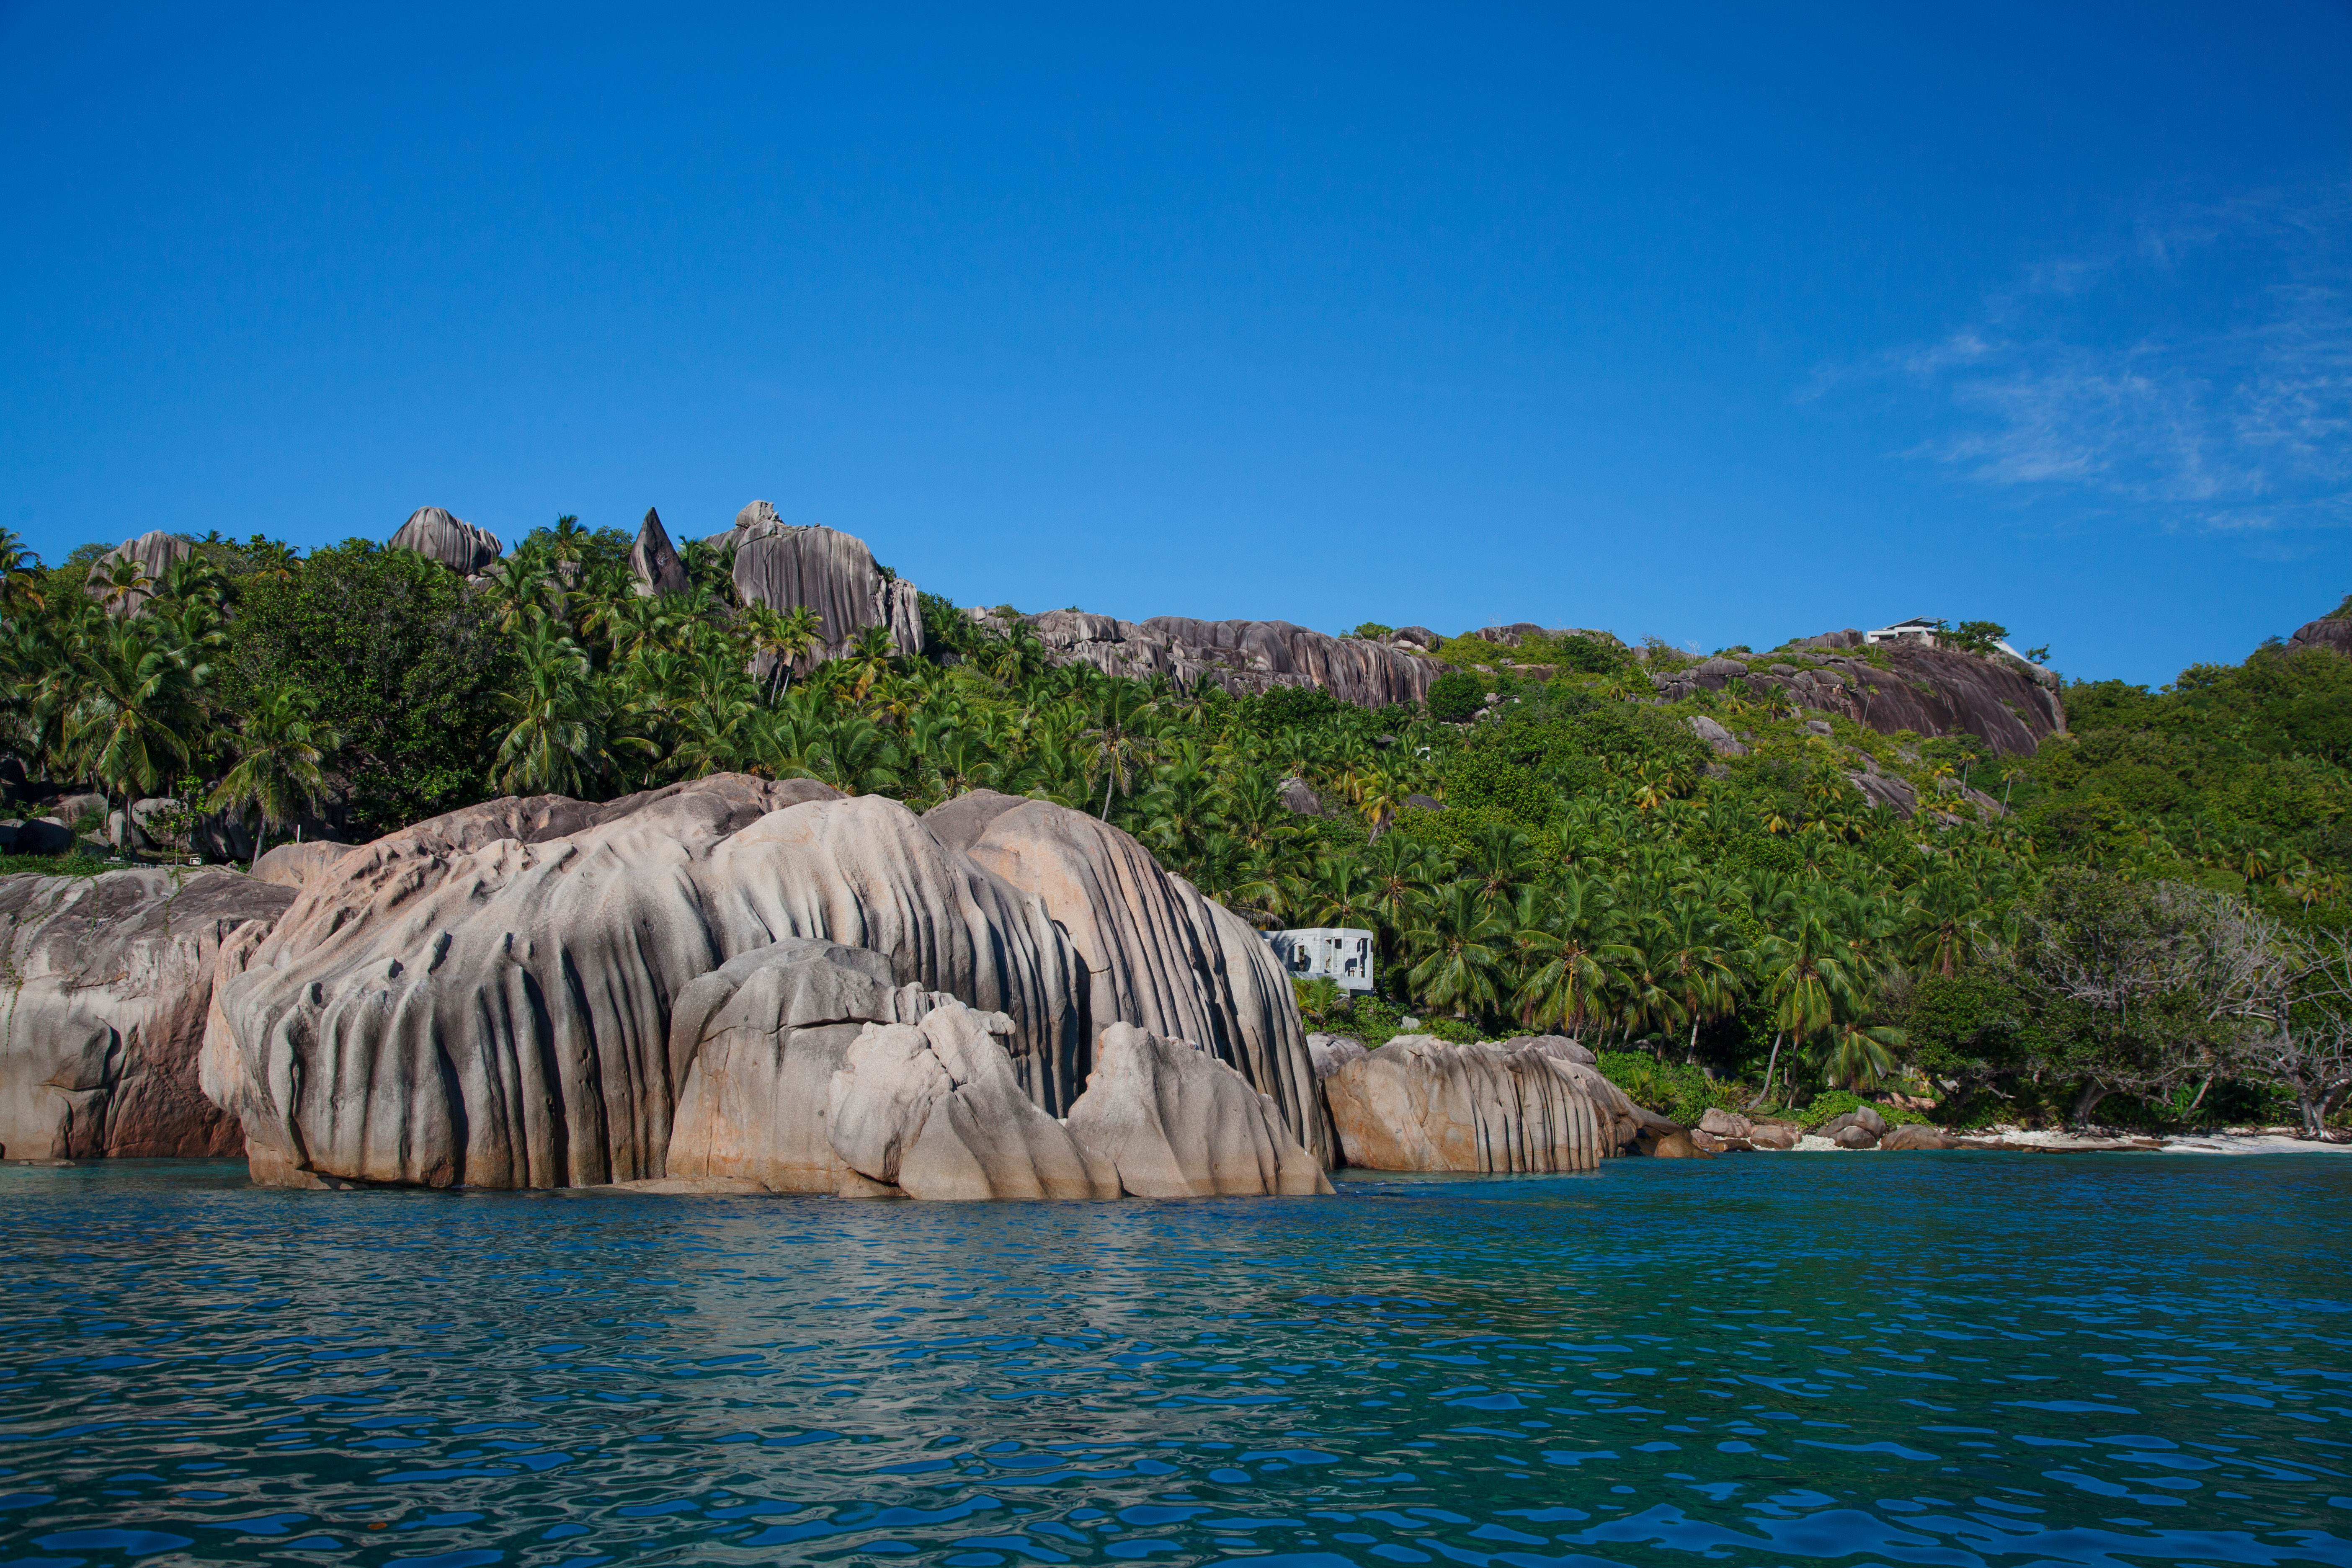 Exclusive Access: Private Islands with Unmatched Fishing and Boating Opportunities